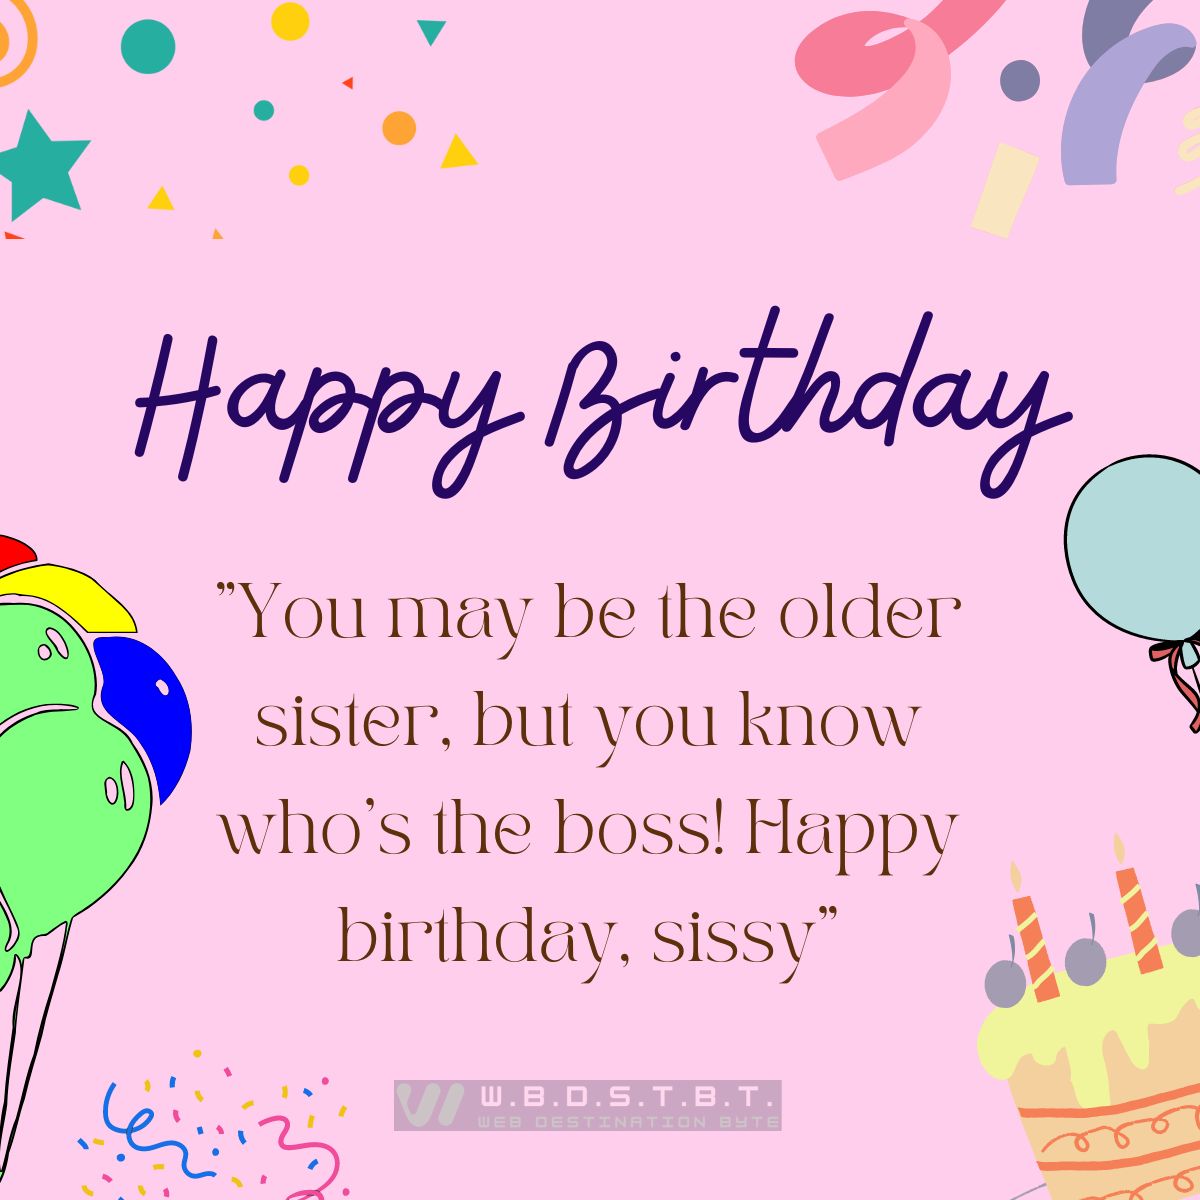 "You may be the older sister, but you know who’s the boss! Happy birthday, sissy"